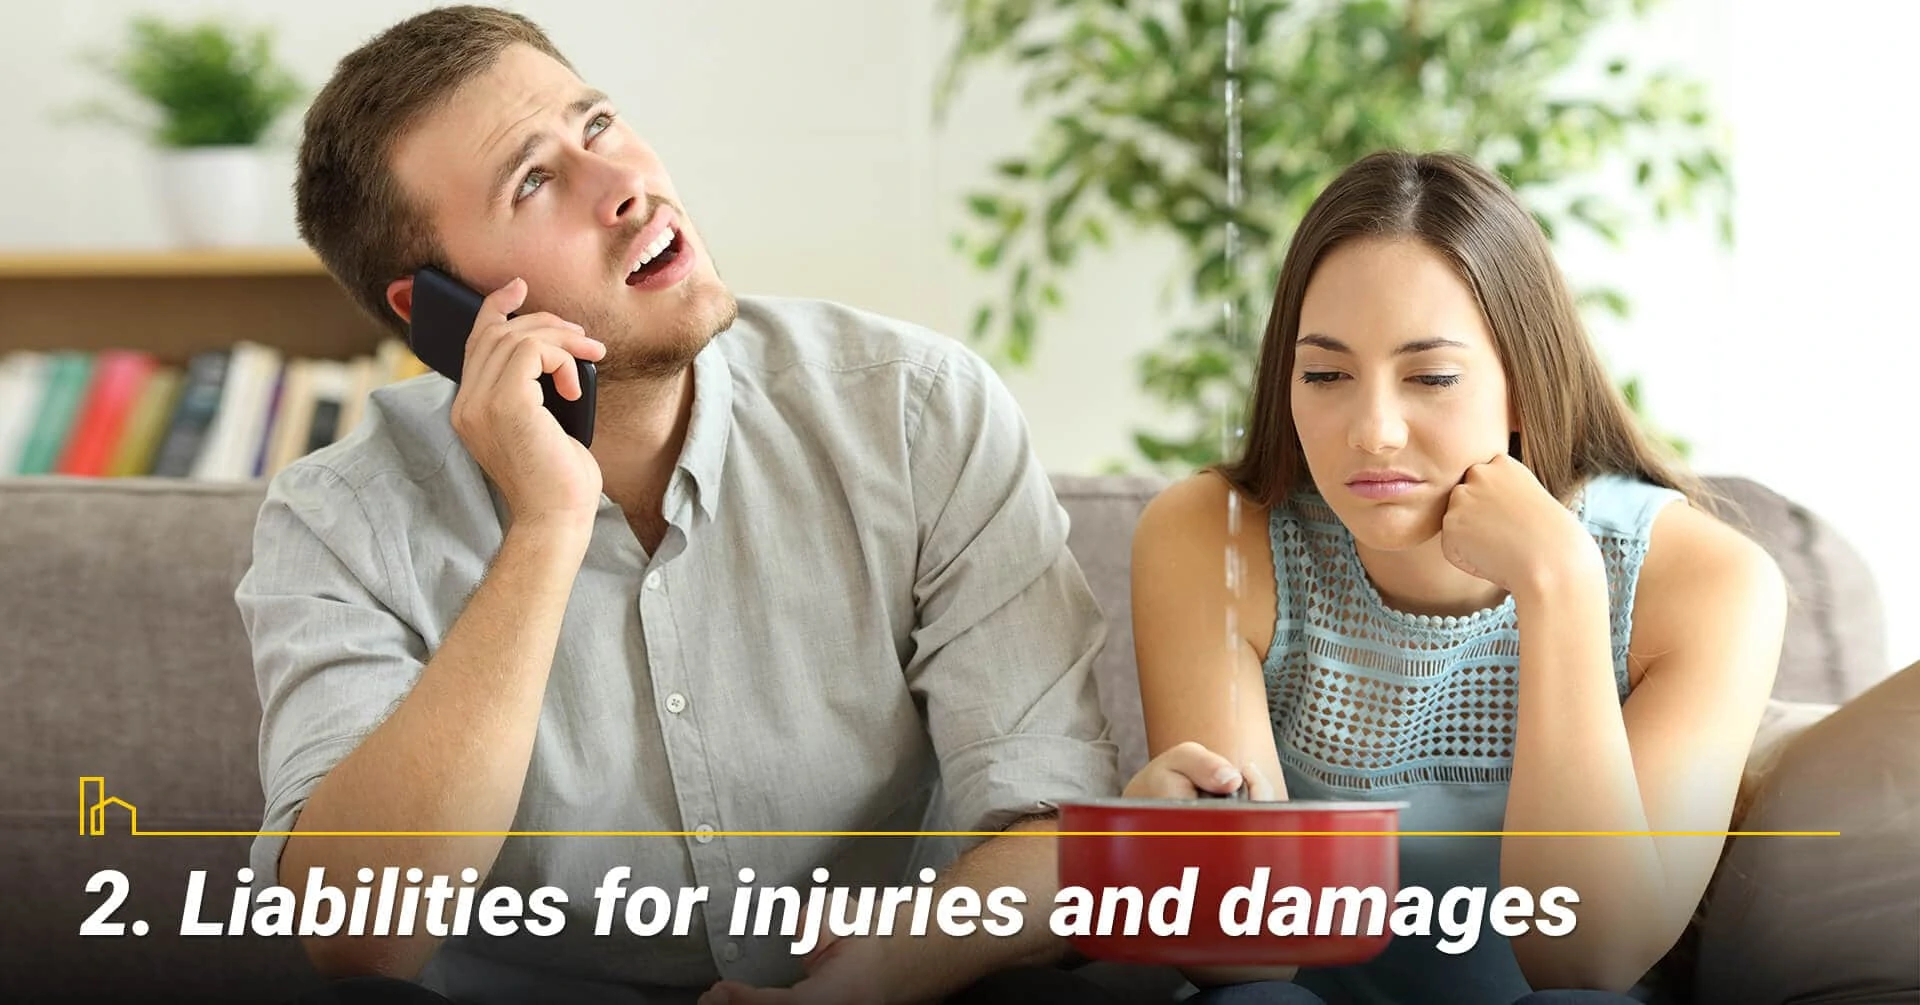 Liabilities for injuries and damages, accountable for damages